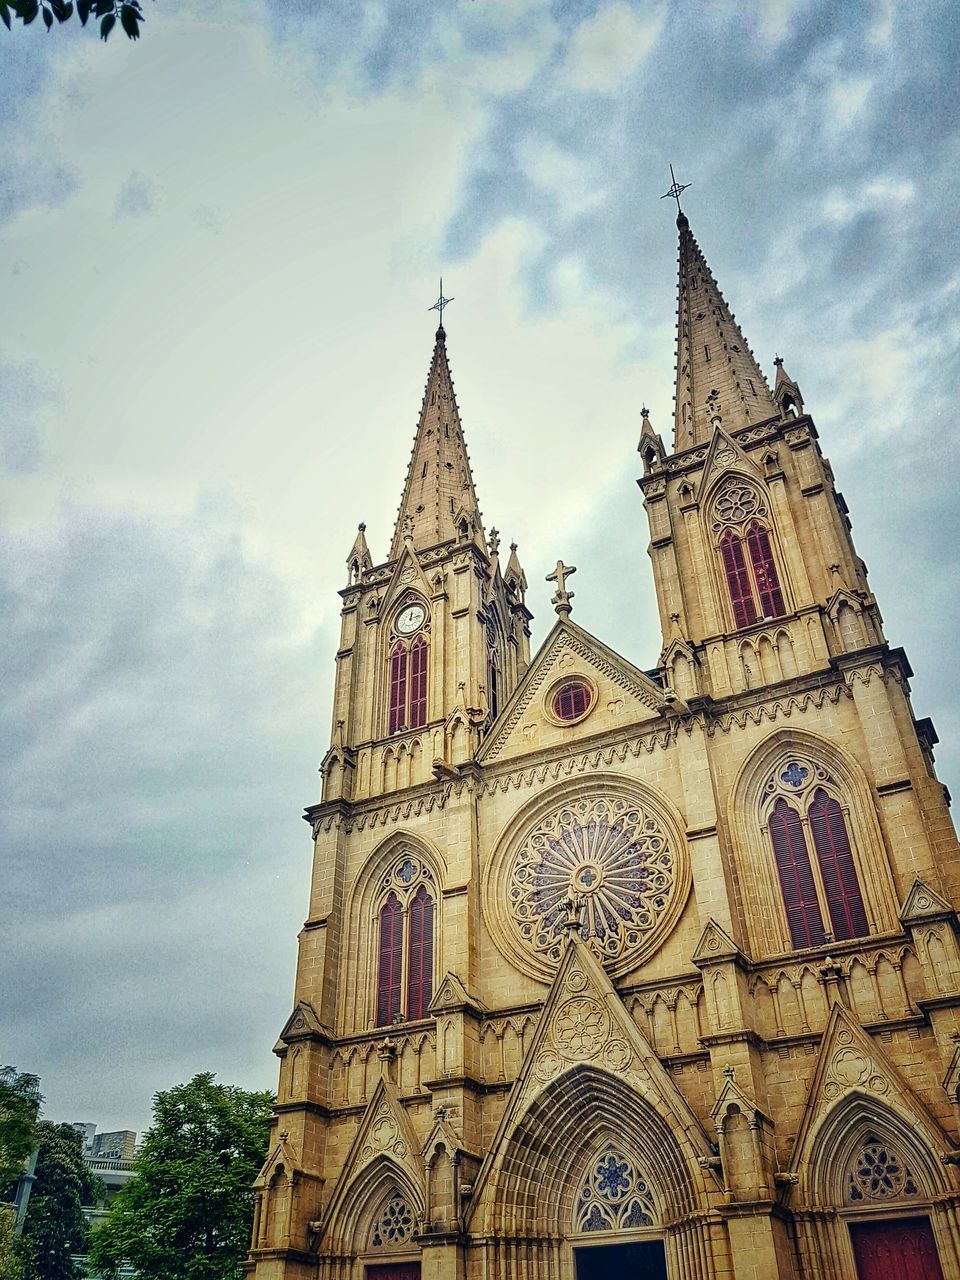 architecture, religion, building exterior, built structure, place of worship, church, low angle view, spirituality, sky, cathedral, tower, history, travel destinations, famous place, cloud - sky, clock tower, travel, tourism